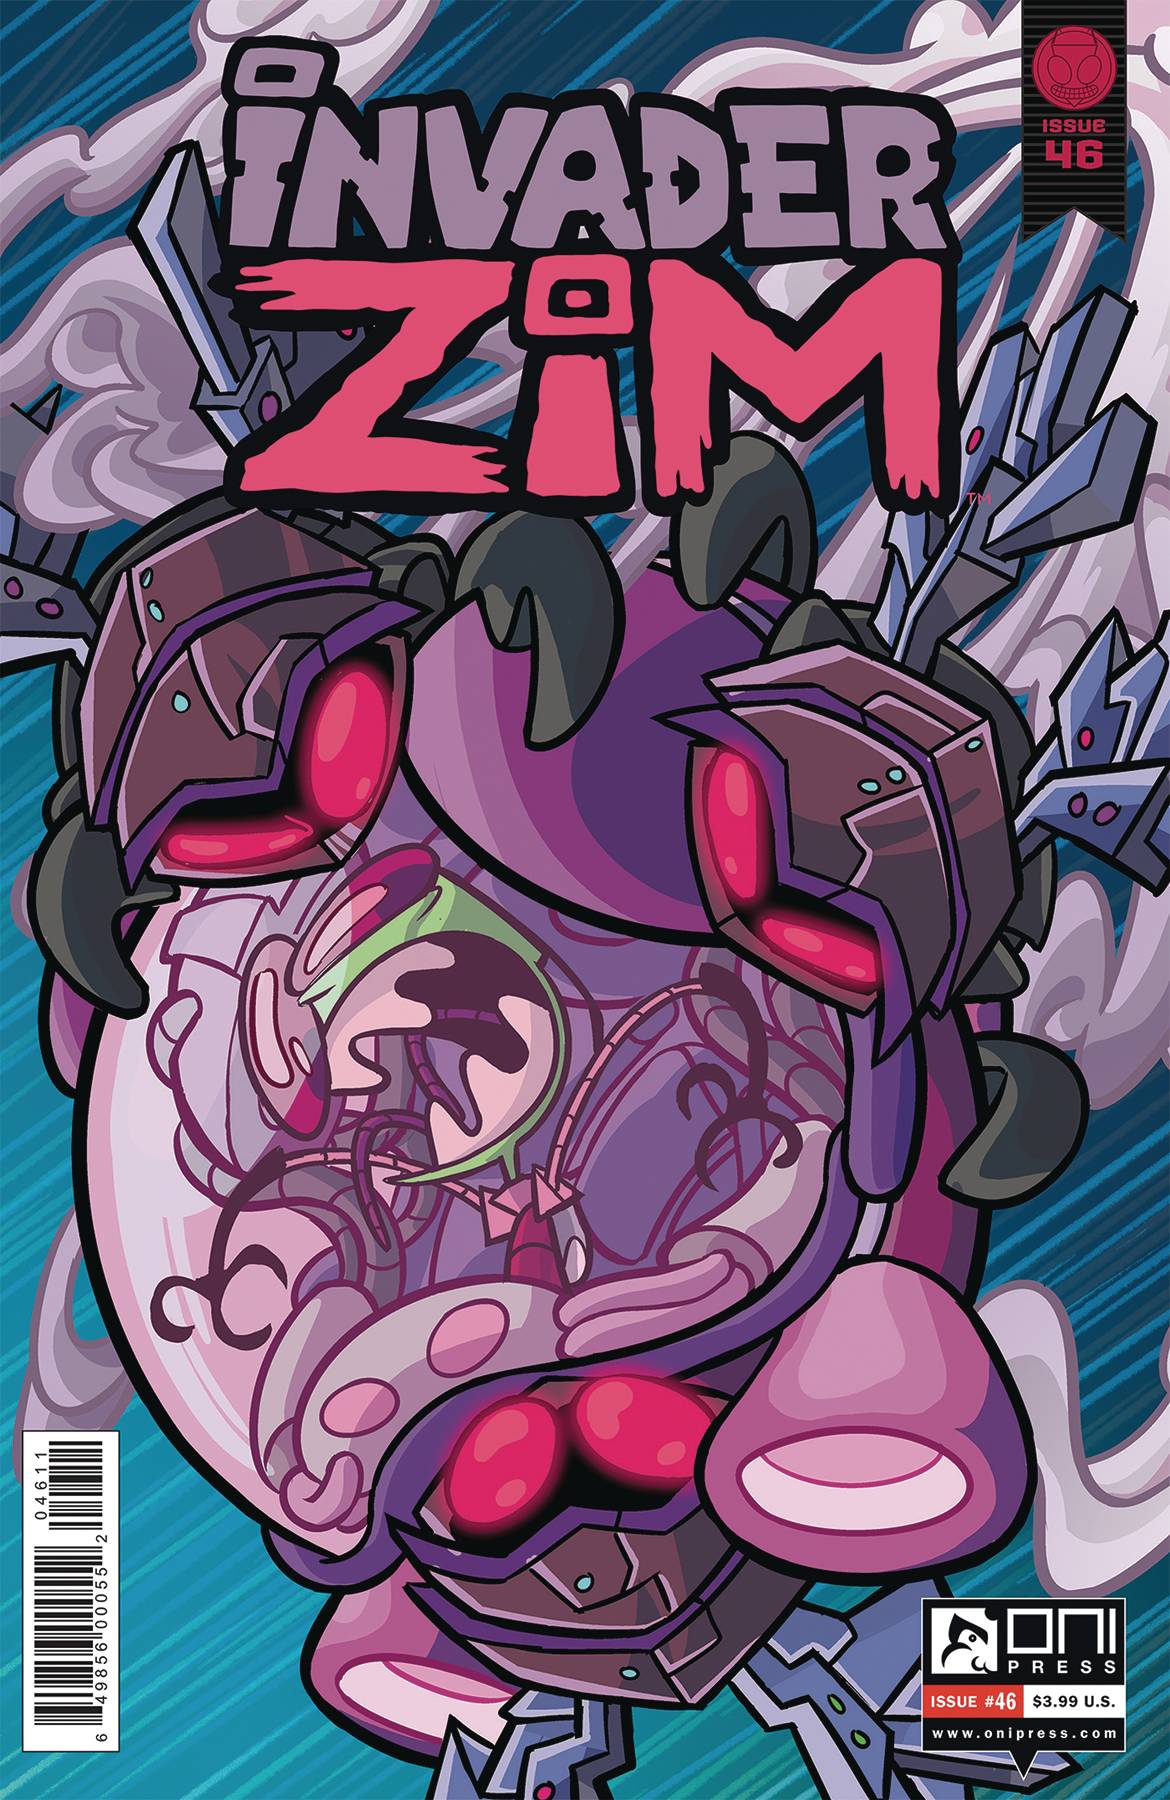 Invader Zim #46 Cover A C